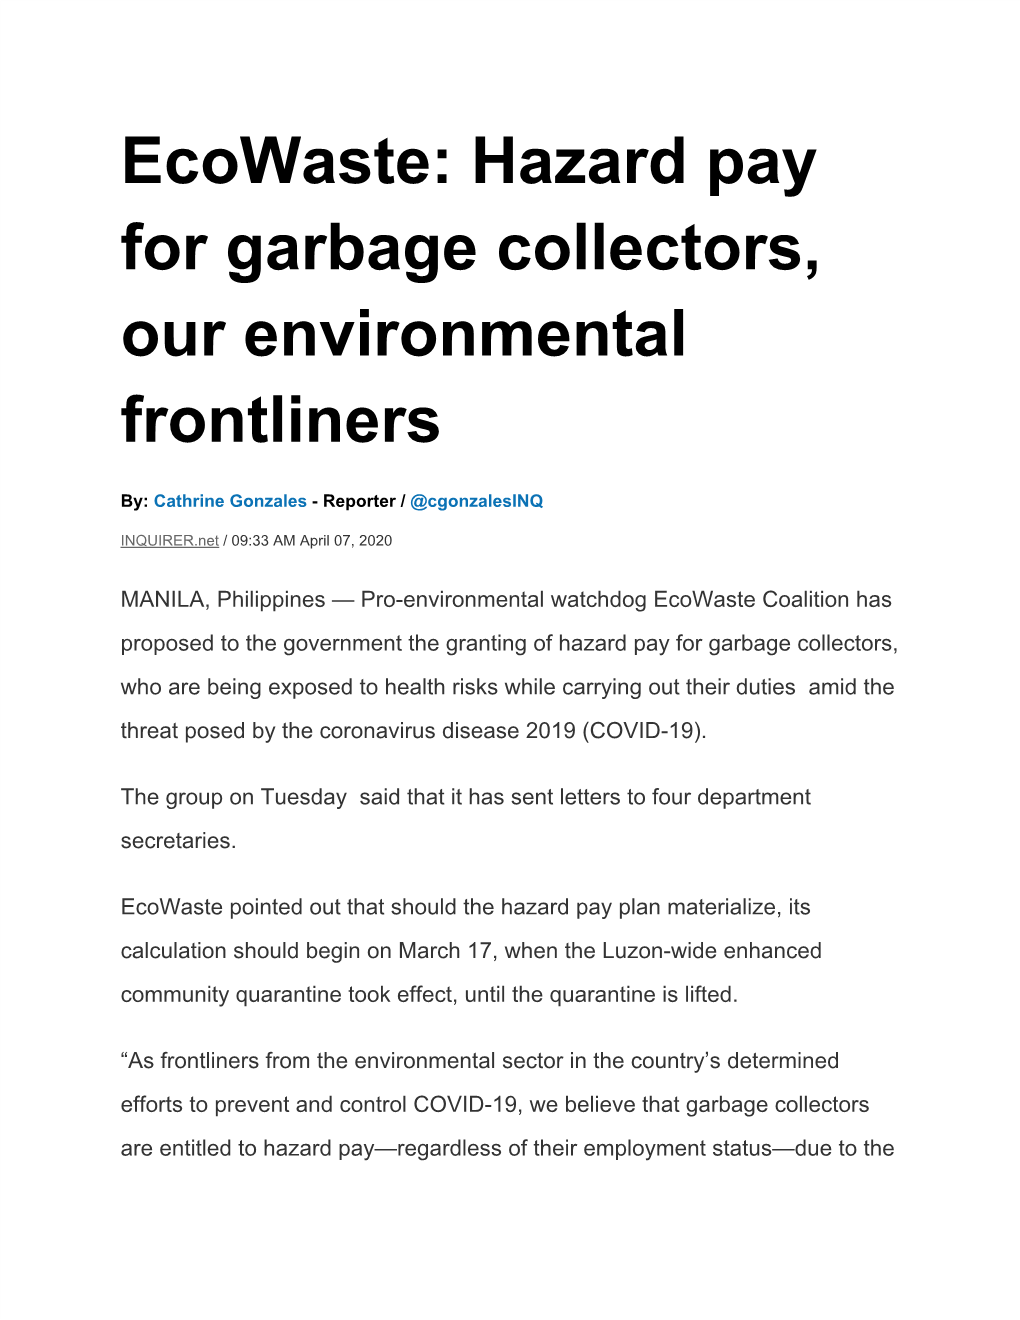 Hazard Pay for Garbage Collectors, Our Environmental Frontliners